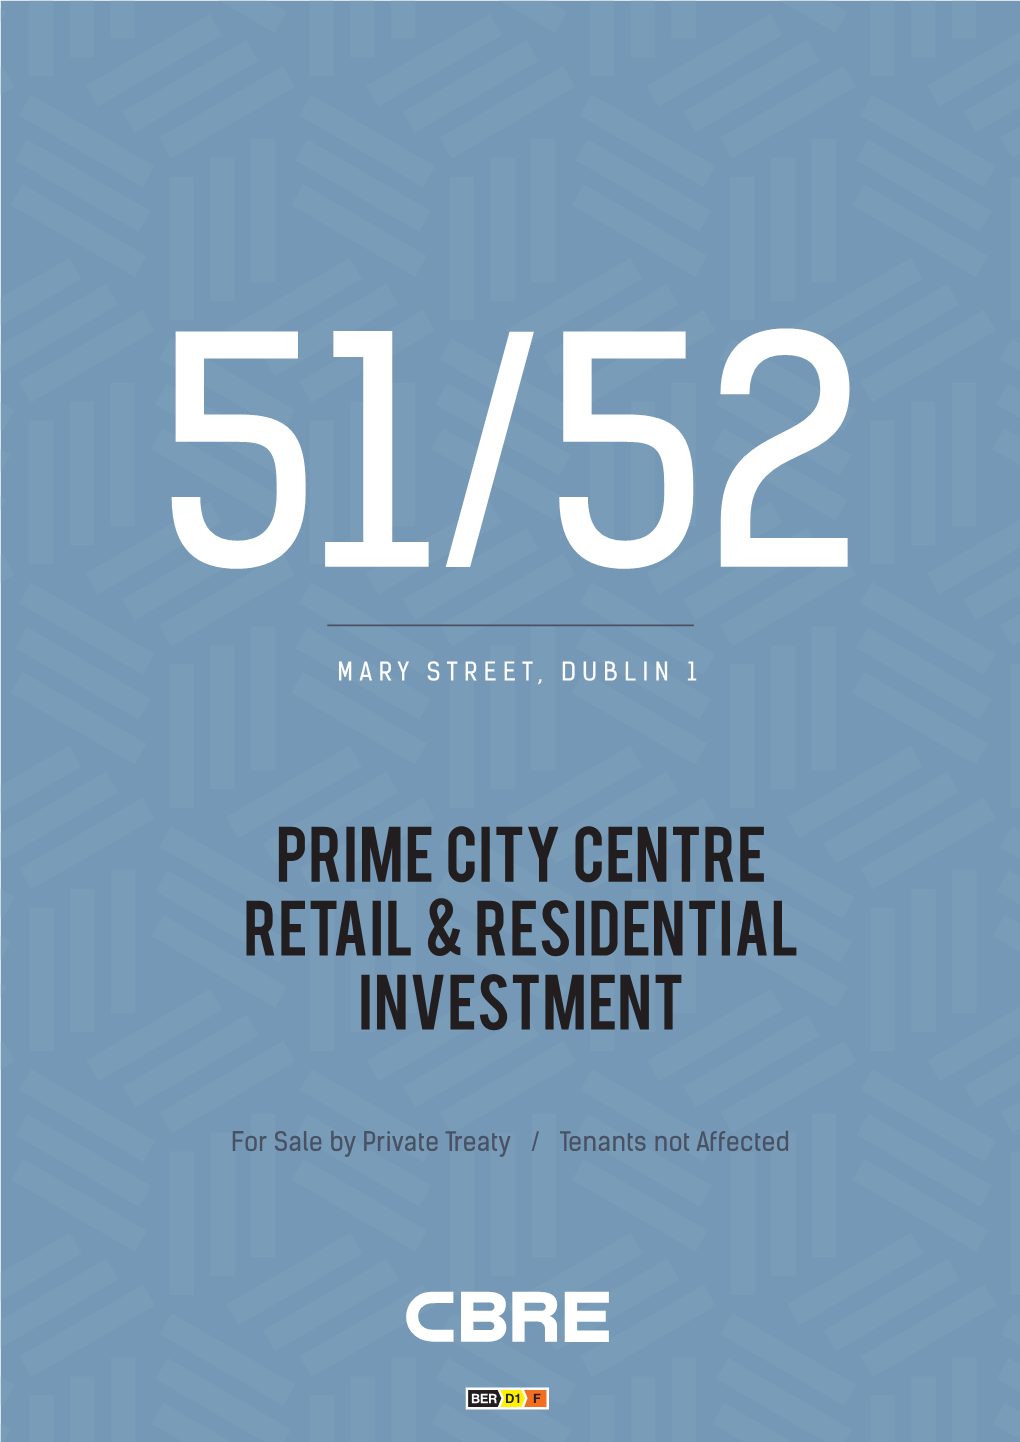 Prime City Centre Retail & Residential Investment